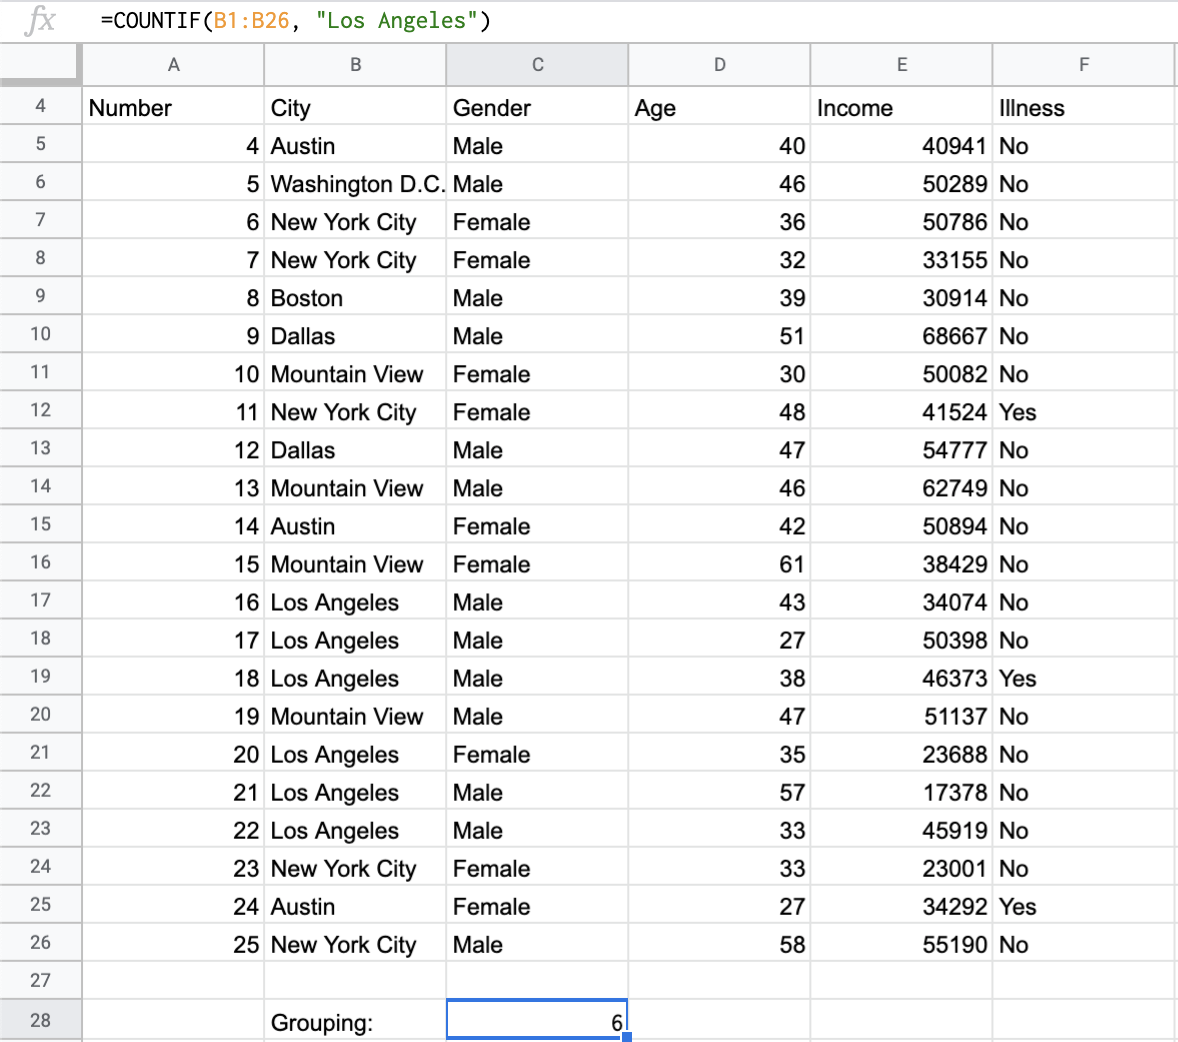 A screenshot from Sheets of a table of information using the COUNTIF grouping function to count how many people are from Los Angeles.